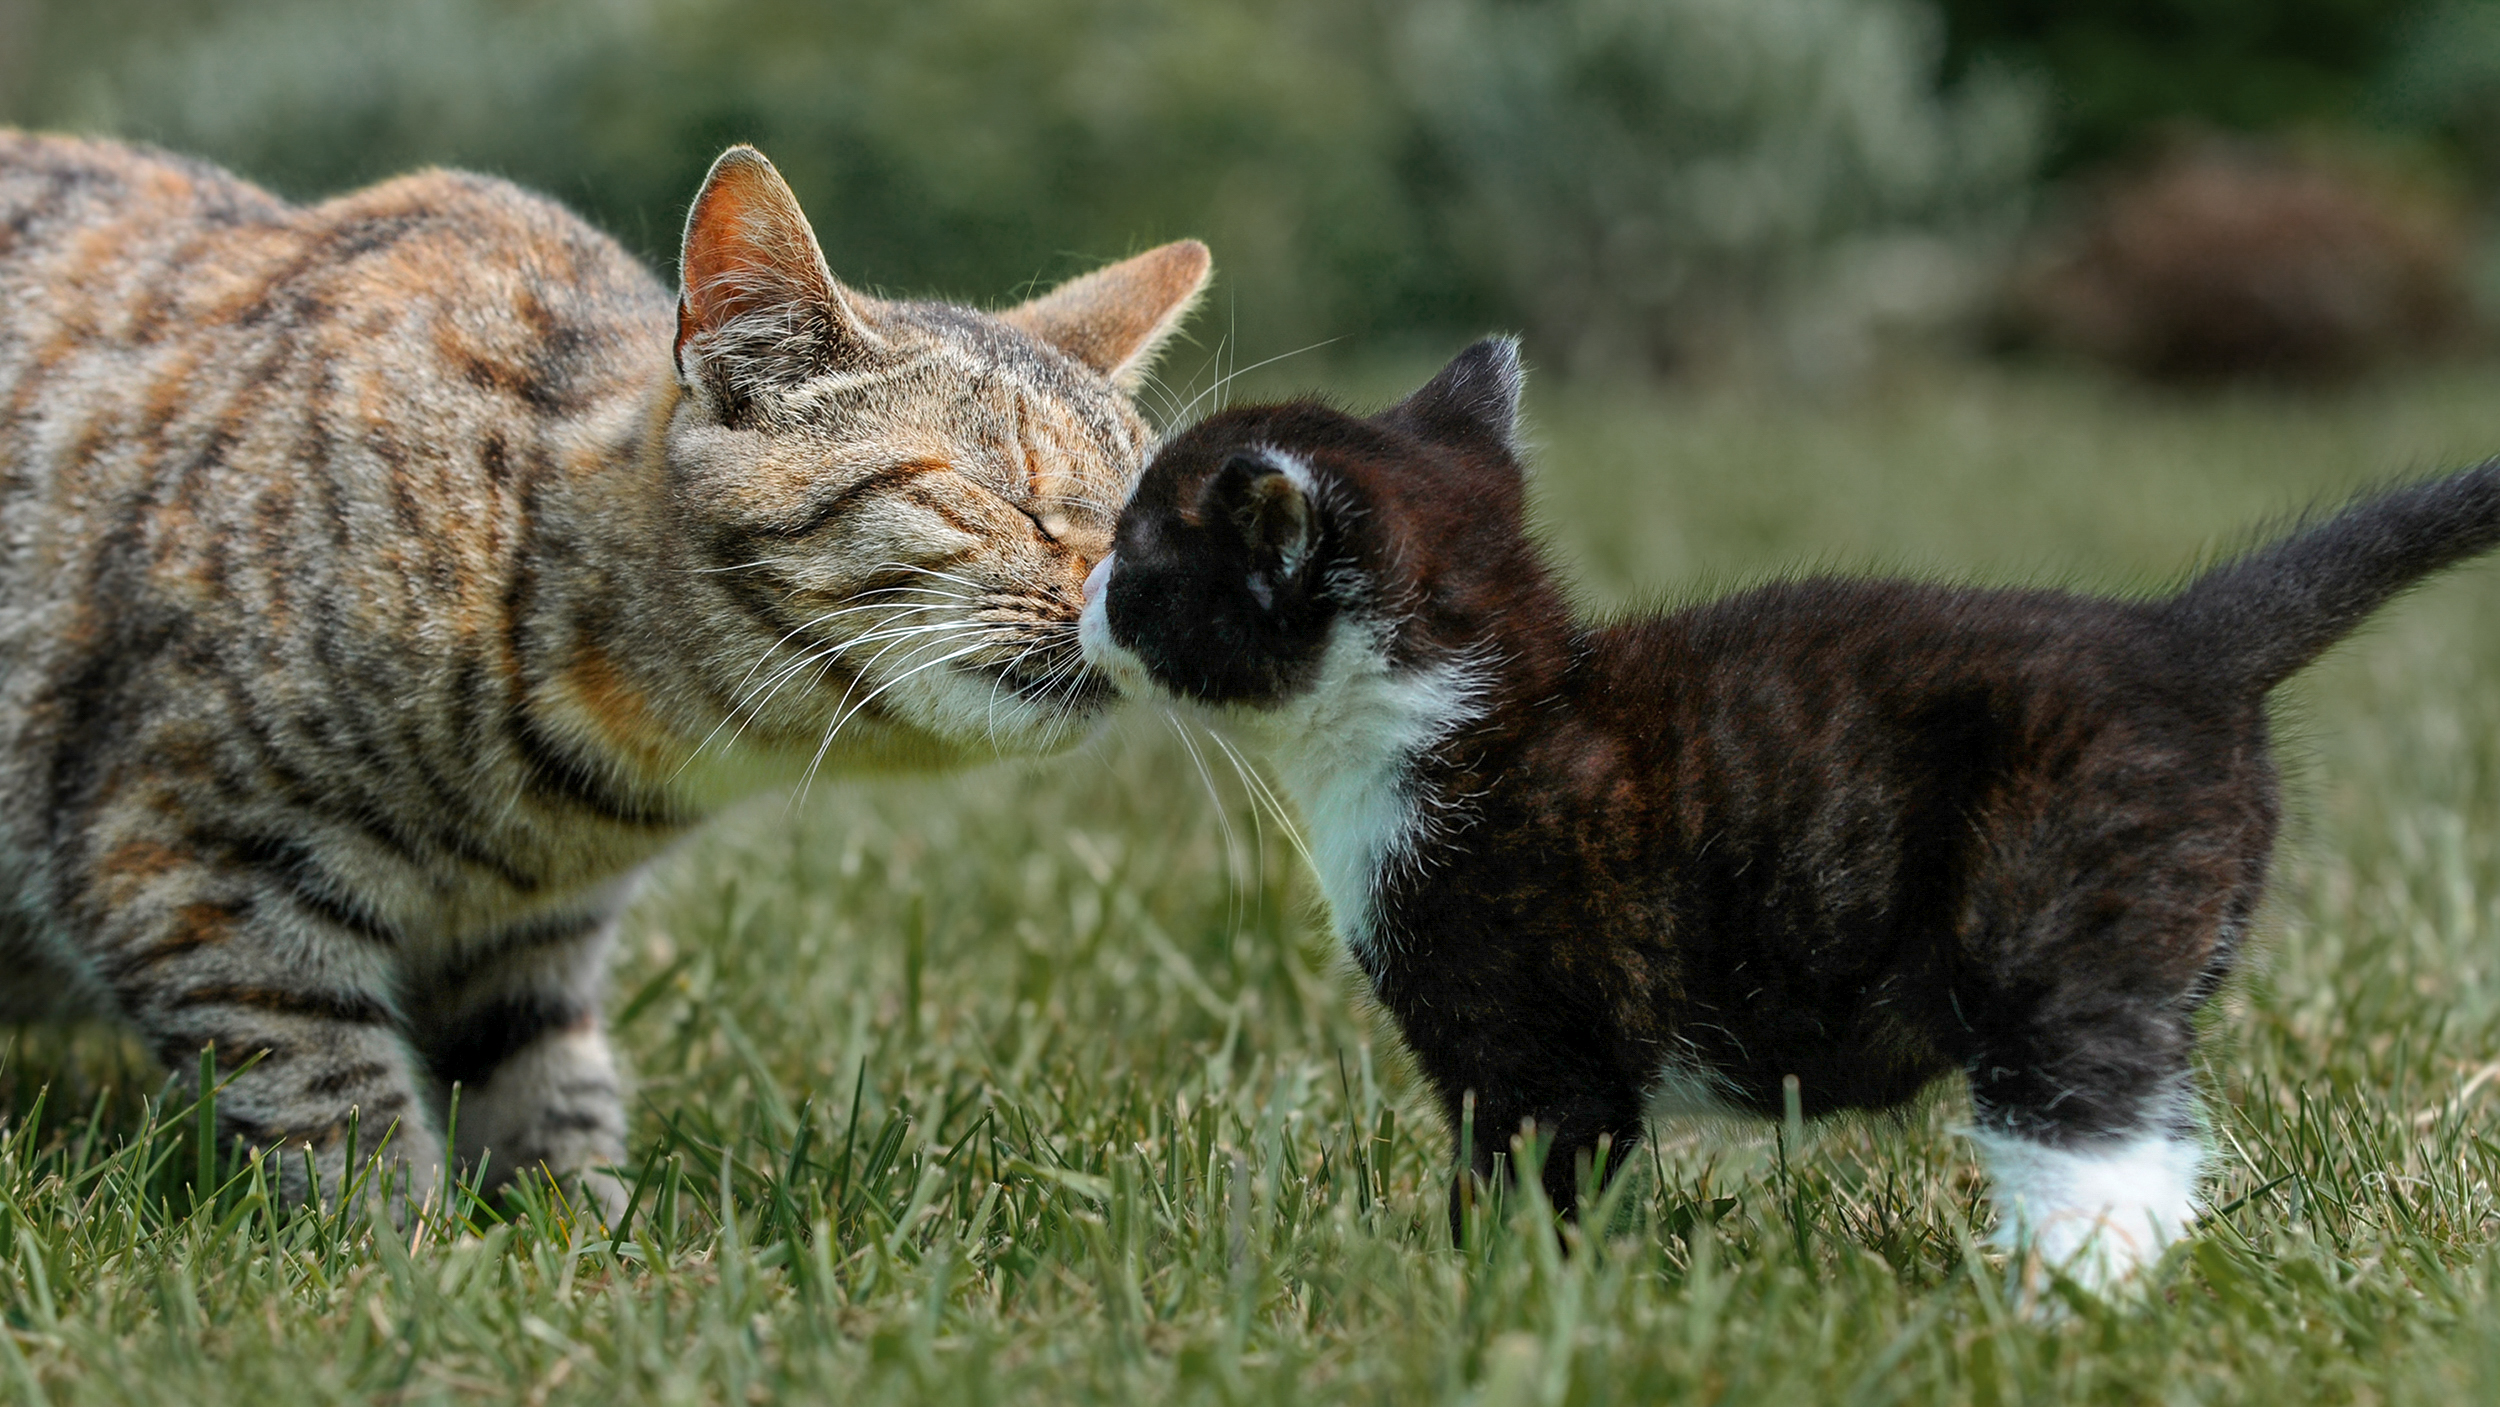 Adult cat standing outside in a garden sniffing a black and white kitten.